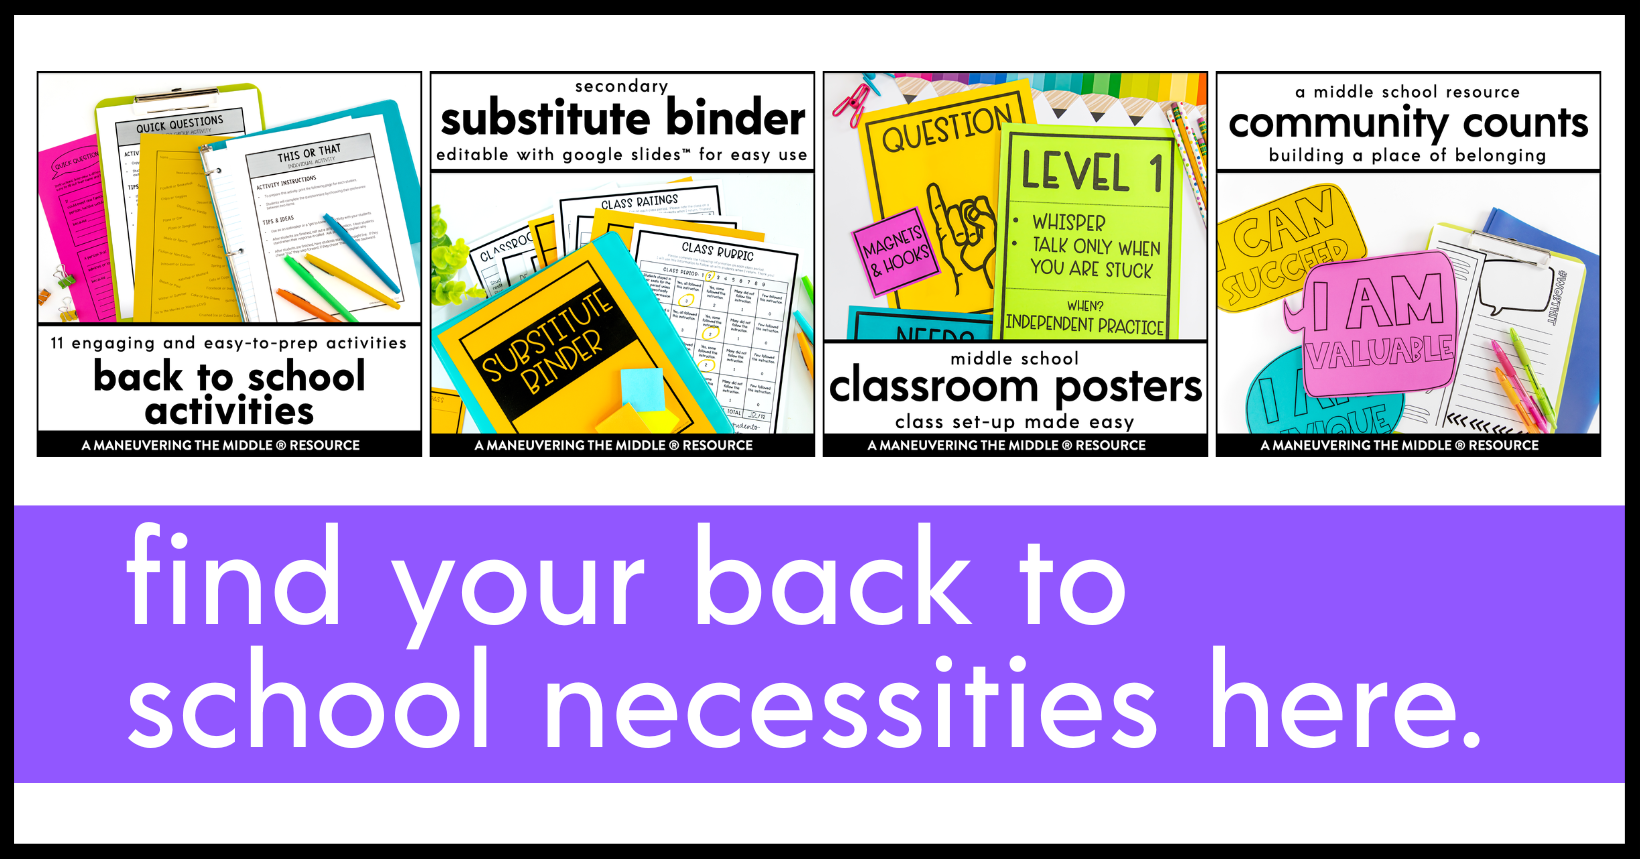 construction paper Archives - Best In Class School Supplies